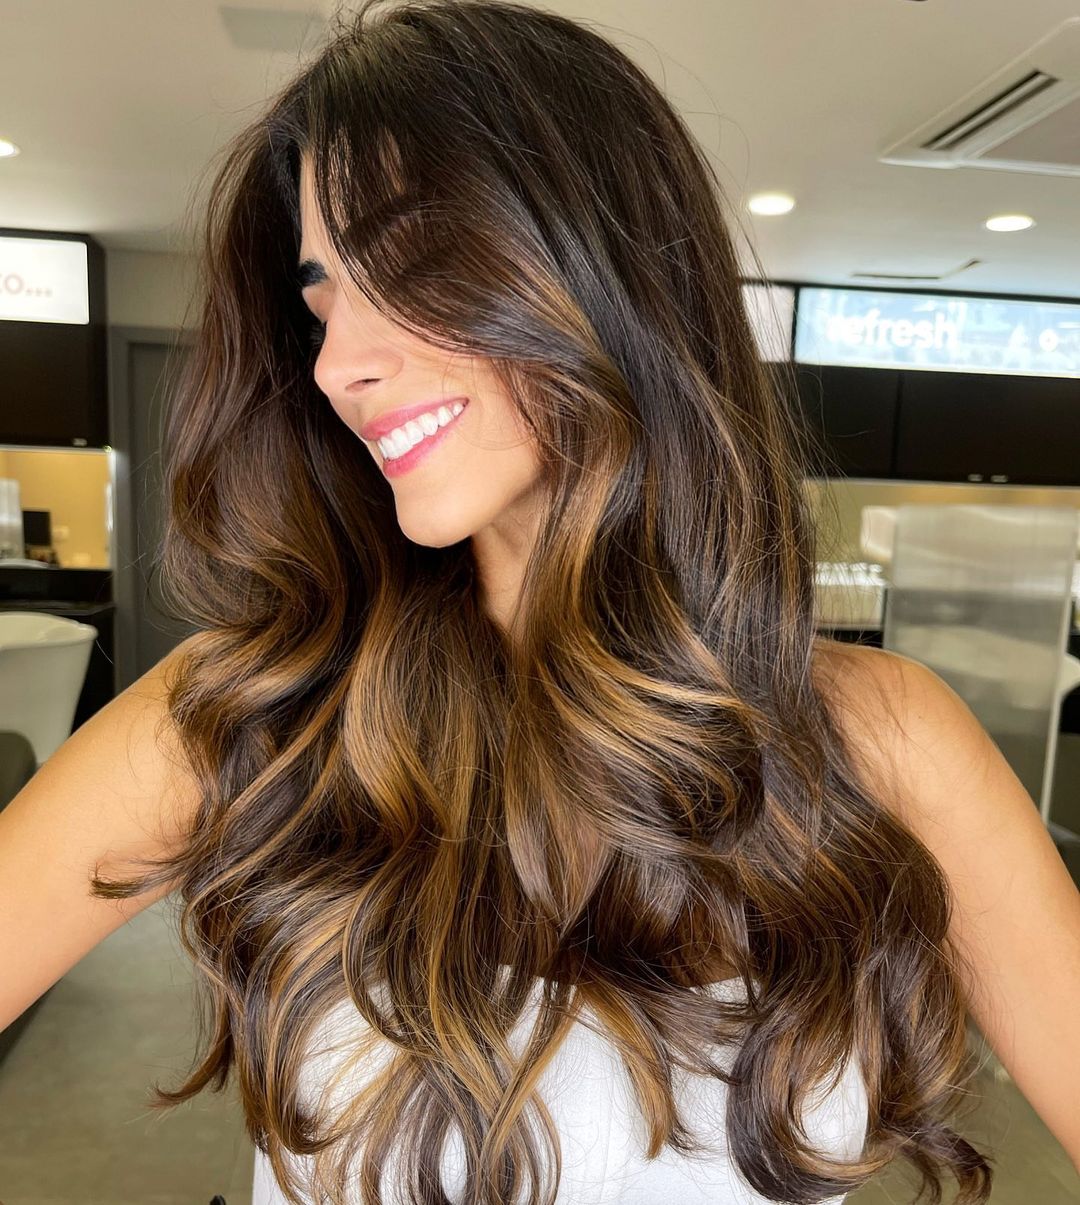 20 Delicious Caramel Balayage Ideas for Your Hair Makeover - Hairstylery